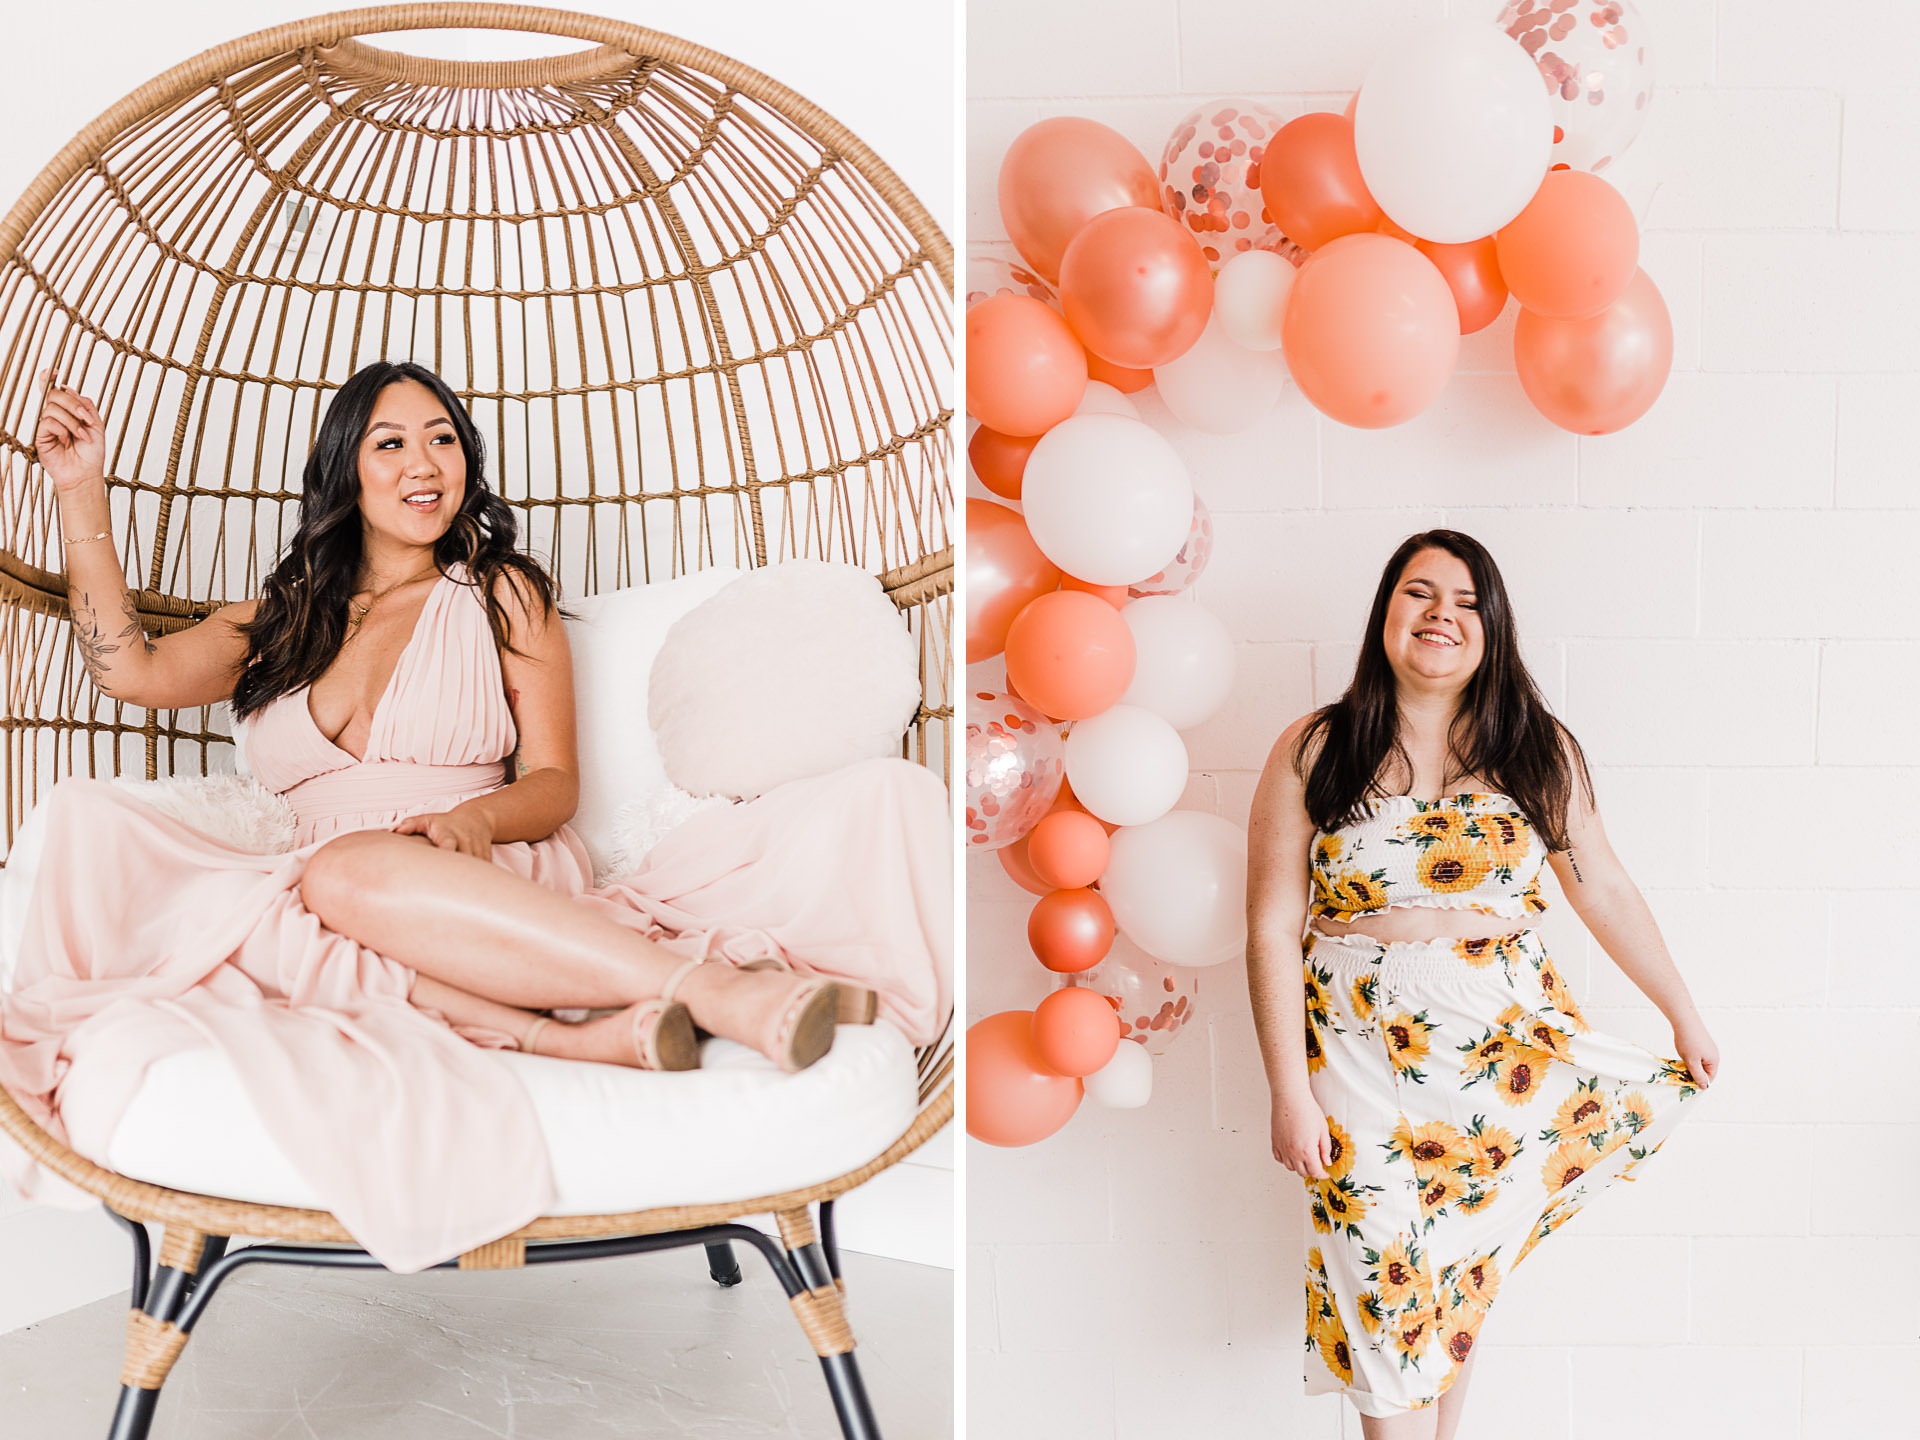 Spring #BossLady Styled Studio Shoot in Dublin, CA at Creative Space Studios